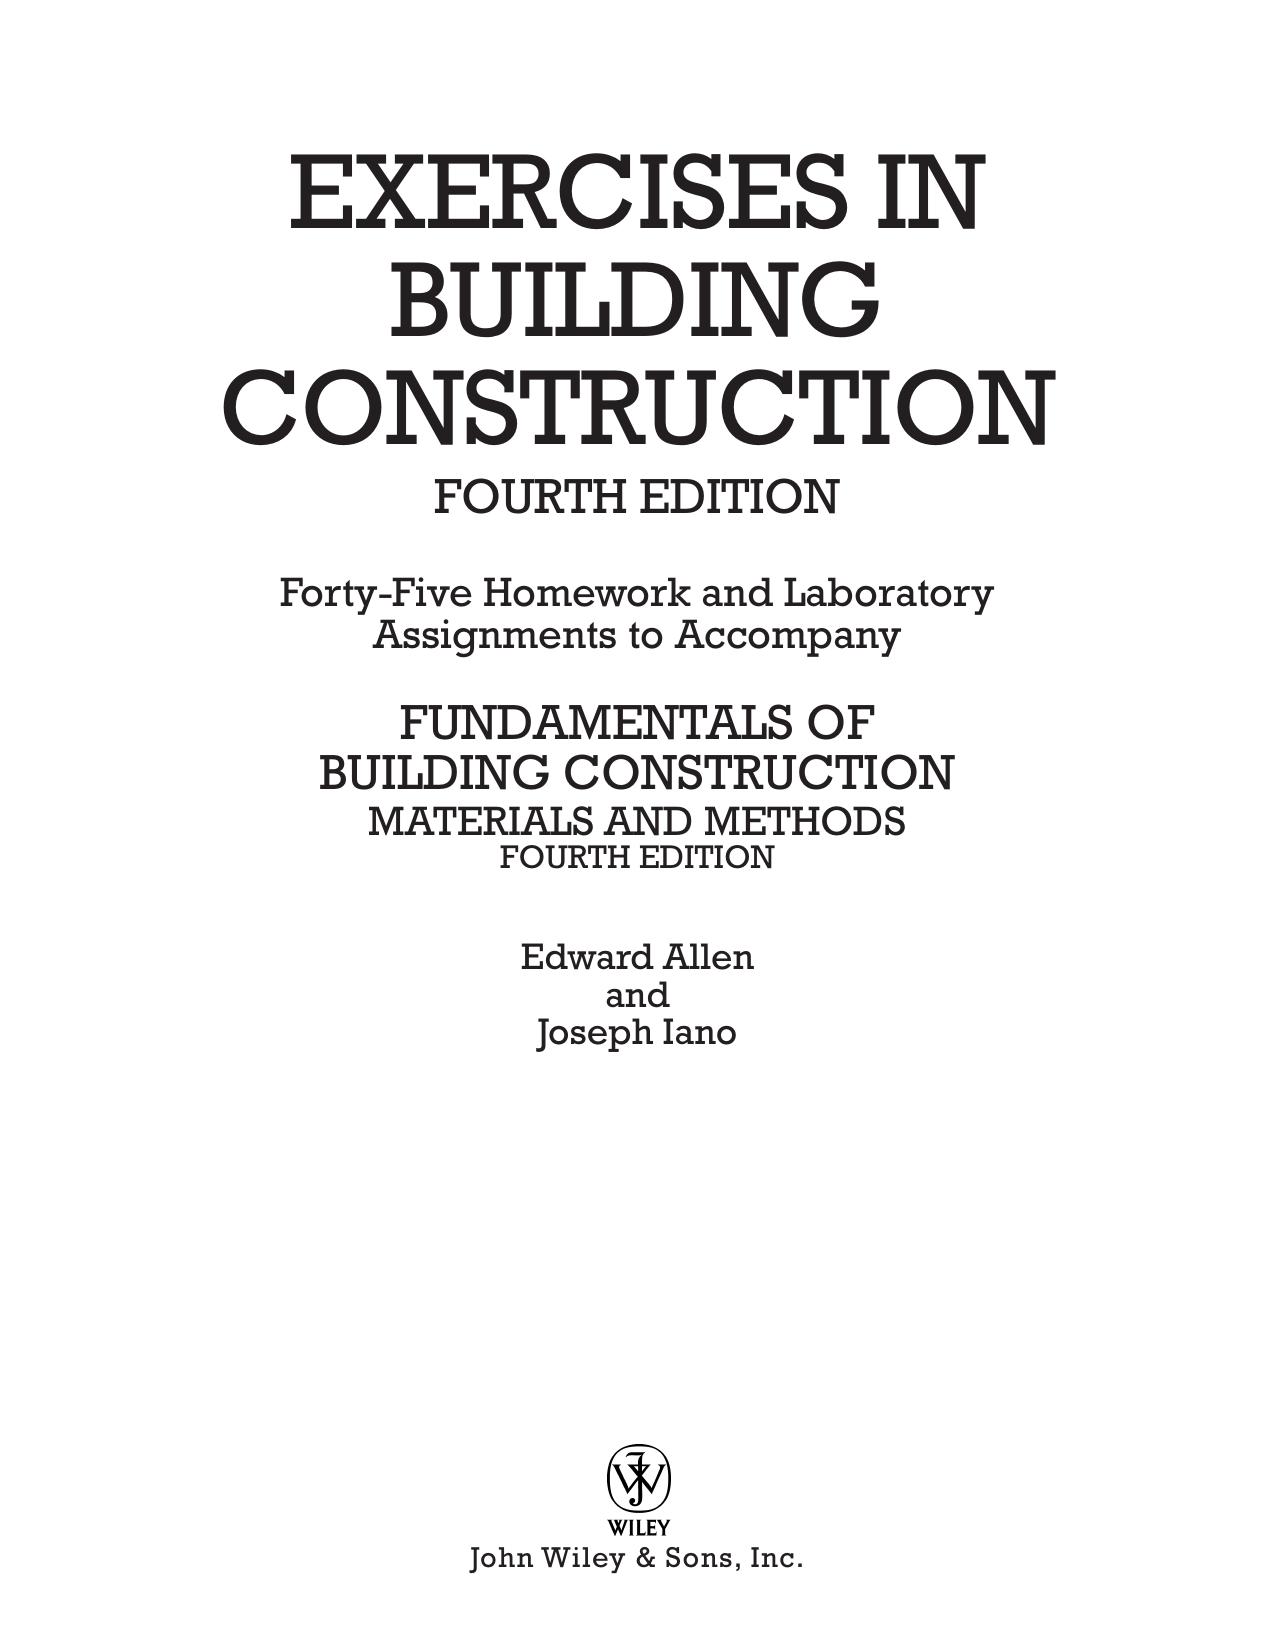 Exercises in Building Construction Materials and Methods by Edward Allen